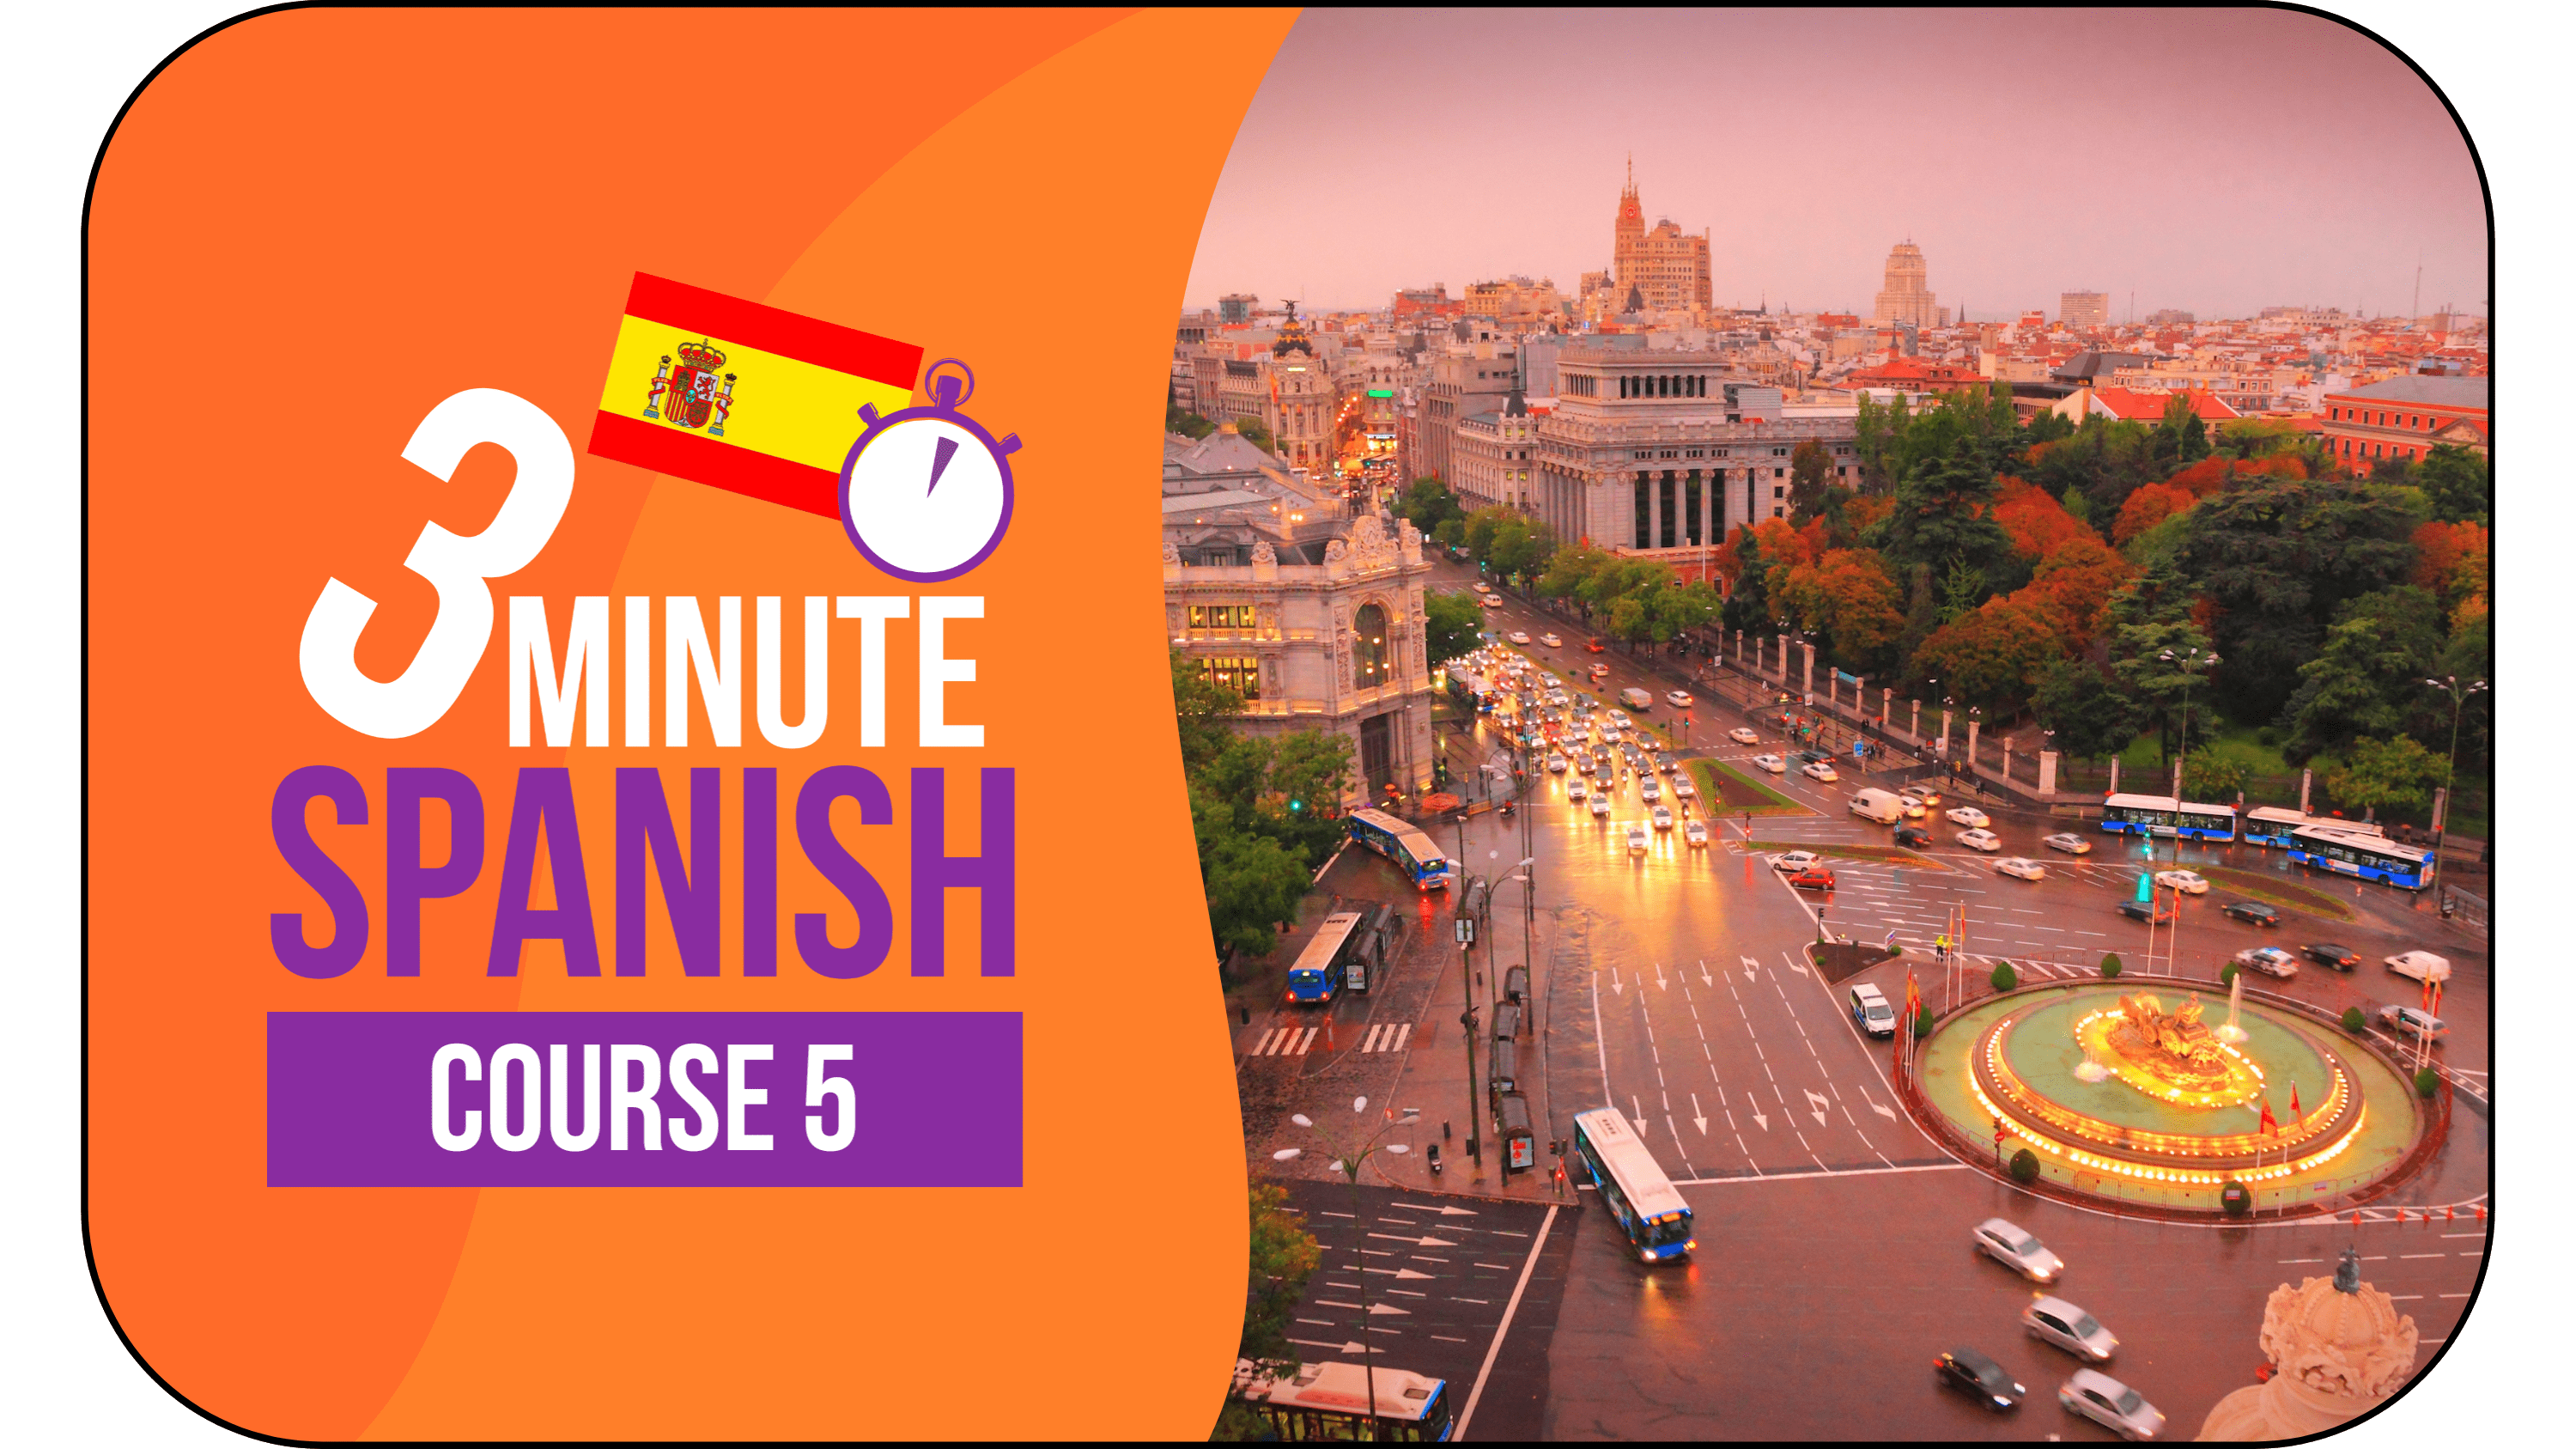 3 Minute Spanish - Course 5